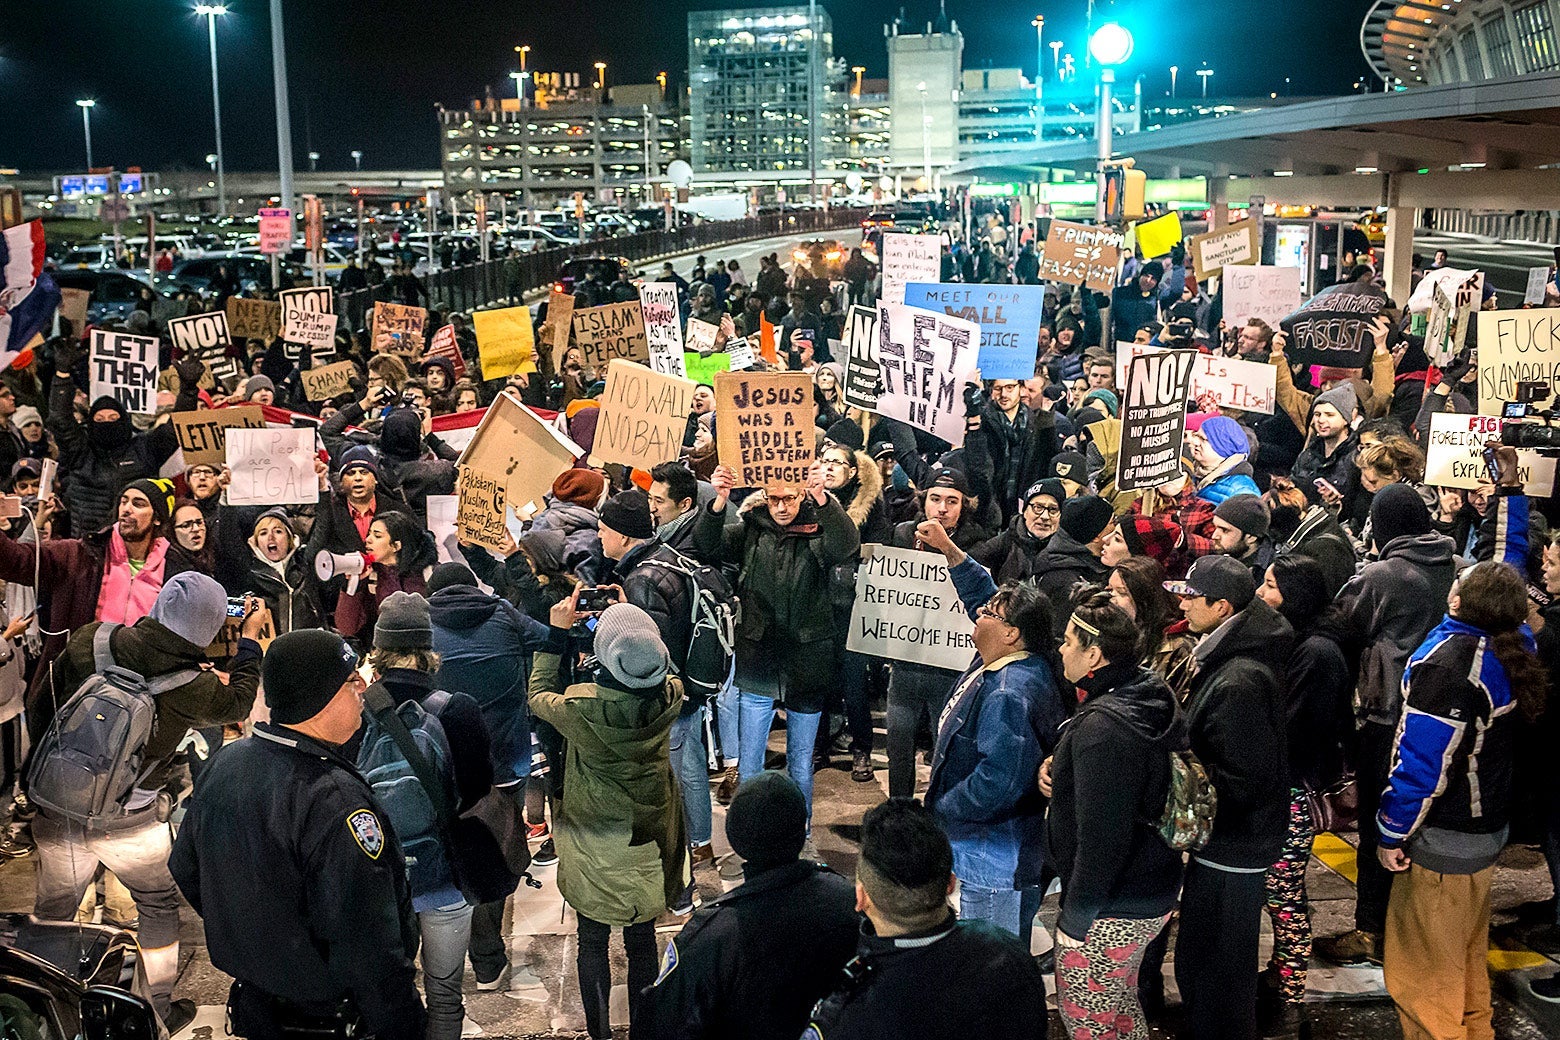 People hold up signs against the Muslim ban outside the terminal at night.